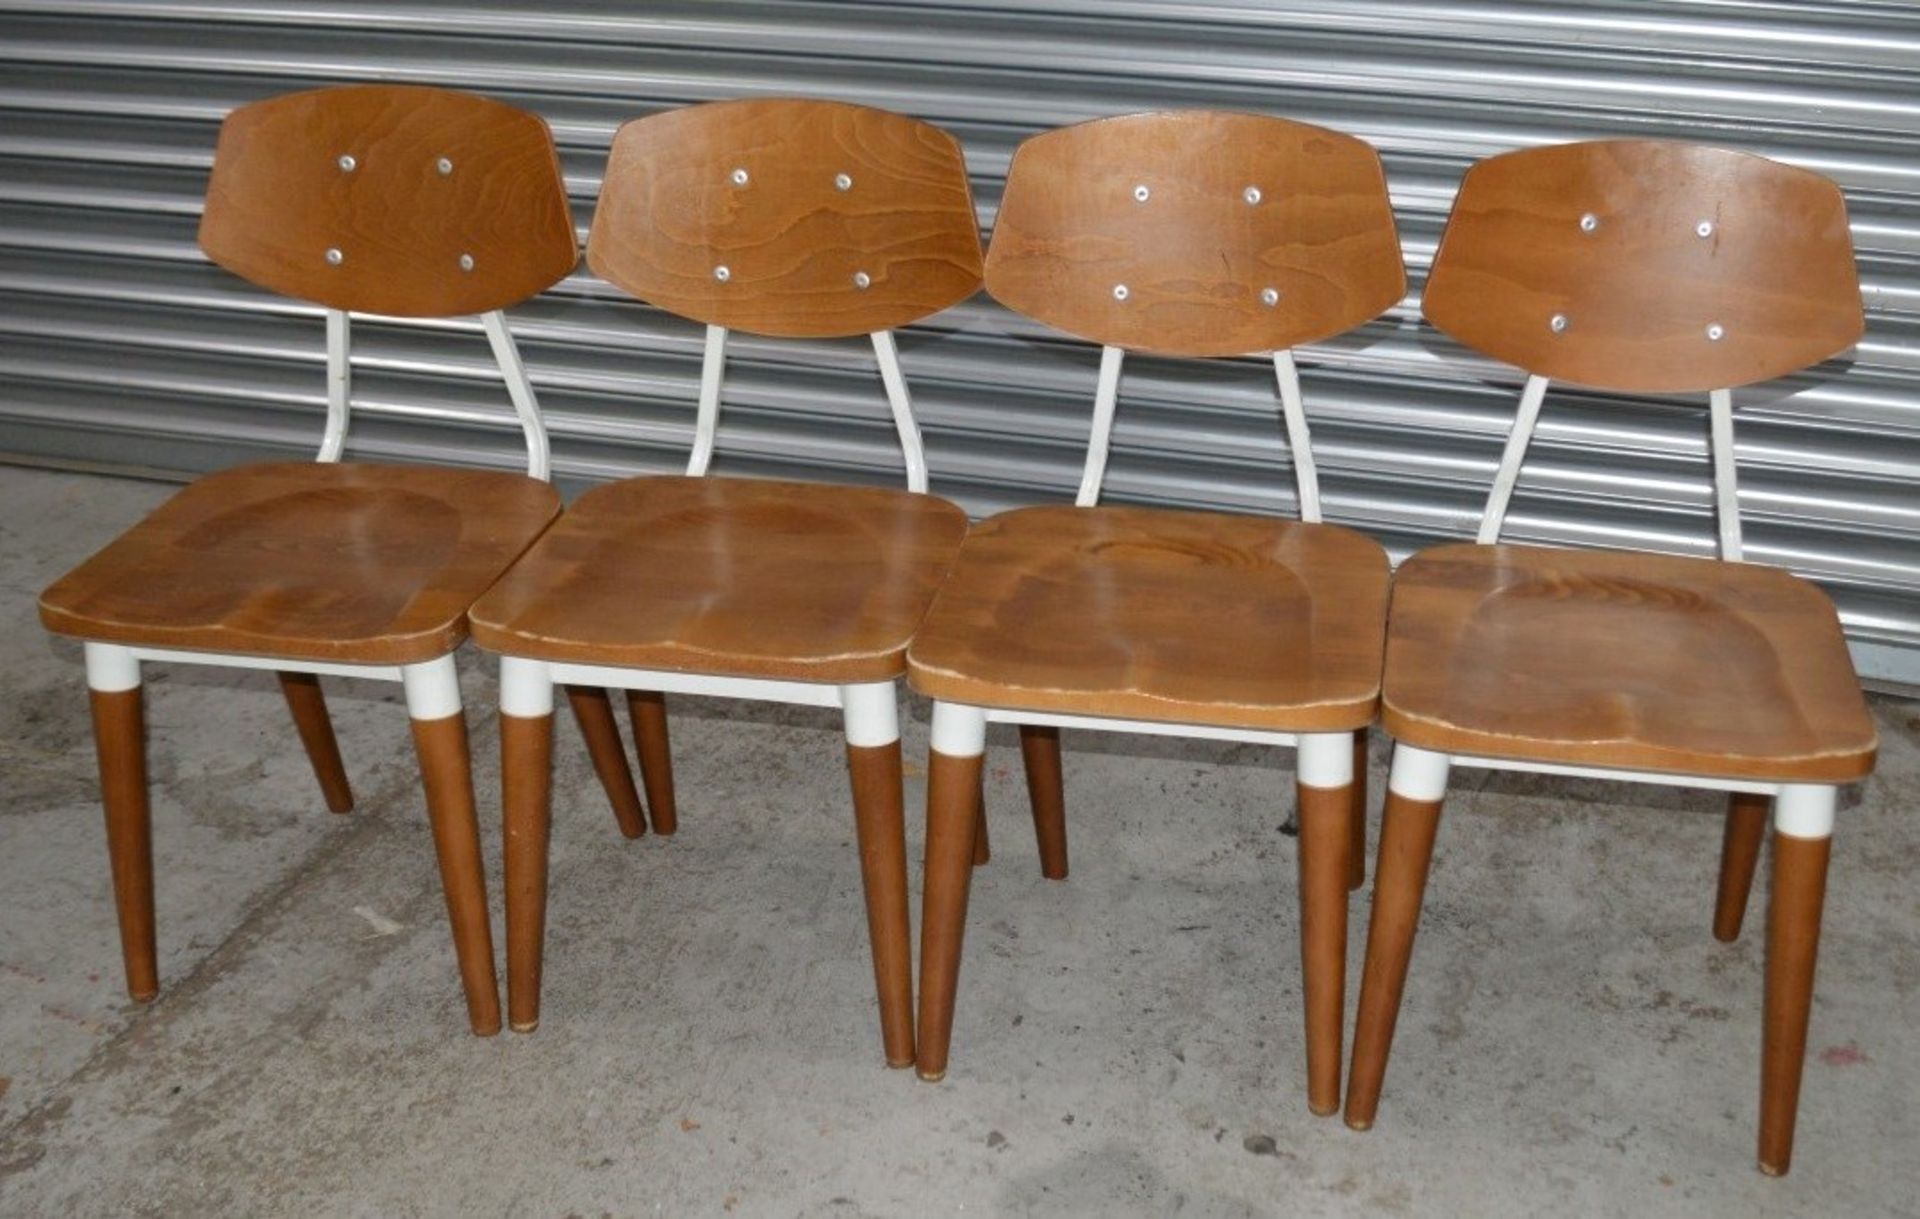 8 x Contemporary Commercial Dining Chairs With A Sturdy Wood And Metal Construction - Image 4 of 10